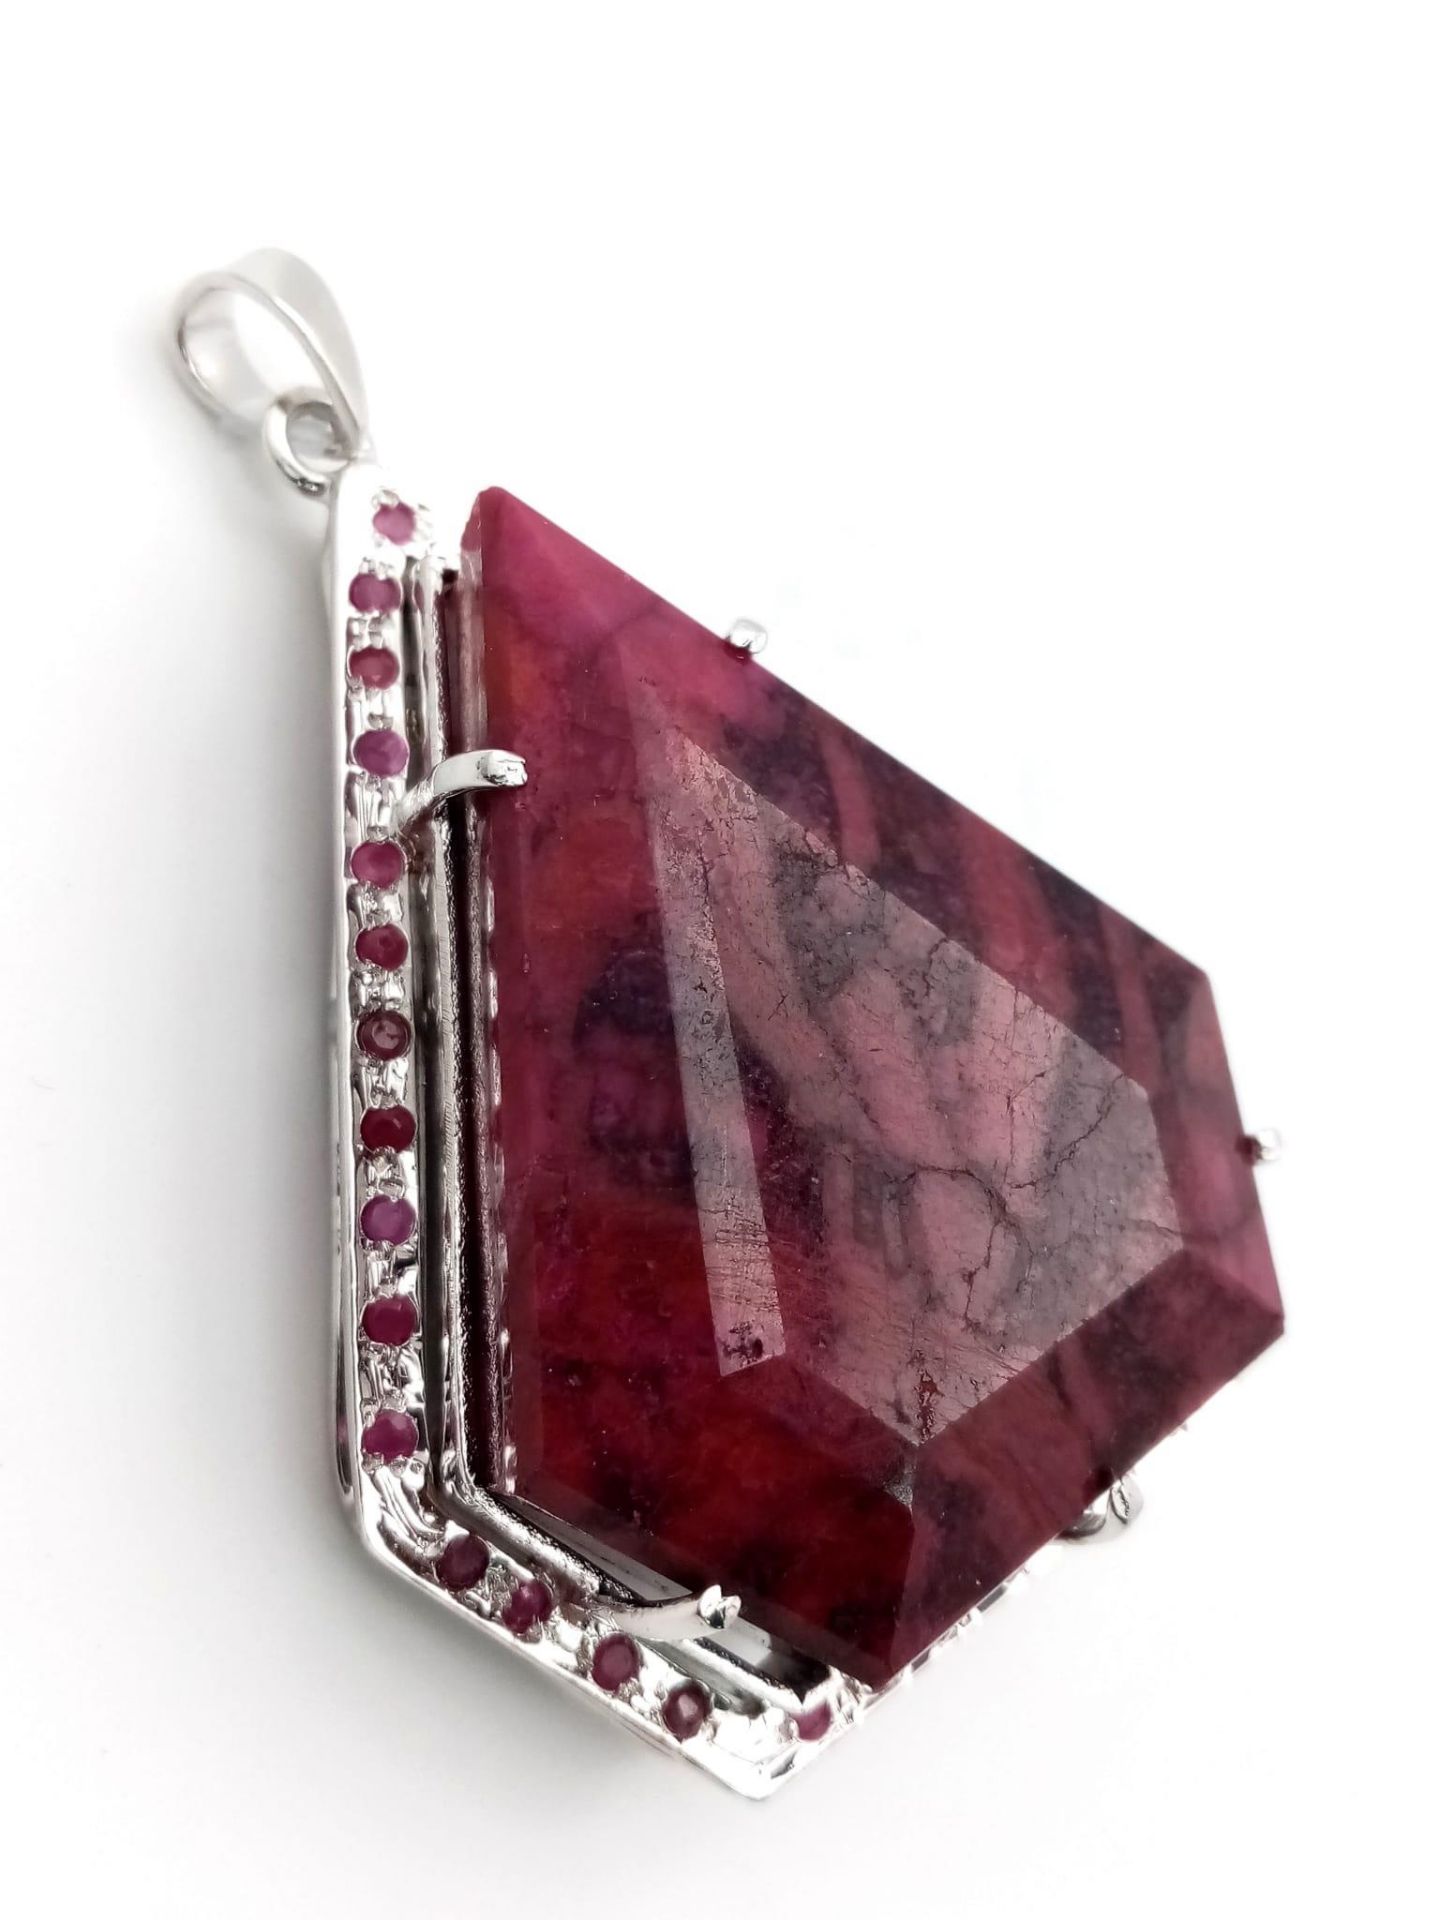 Make a massive statement! This 106.5 gram, Sterling Silver framed, 394ctw Ruby Pendant. Measures 8cm